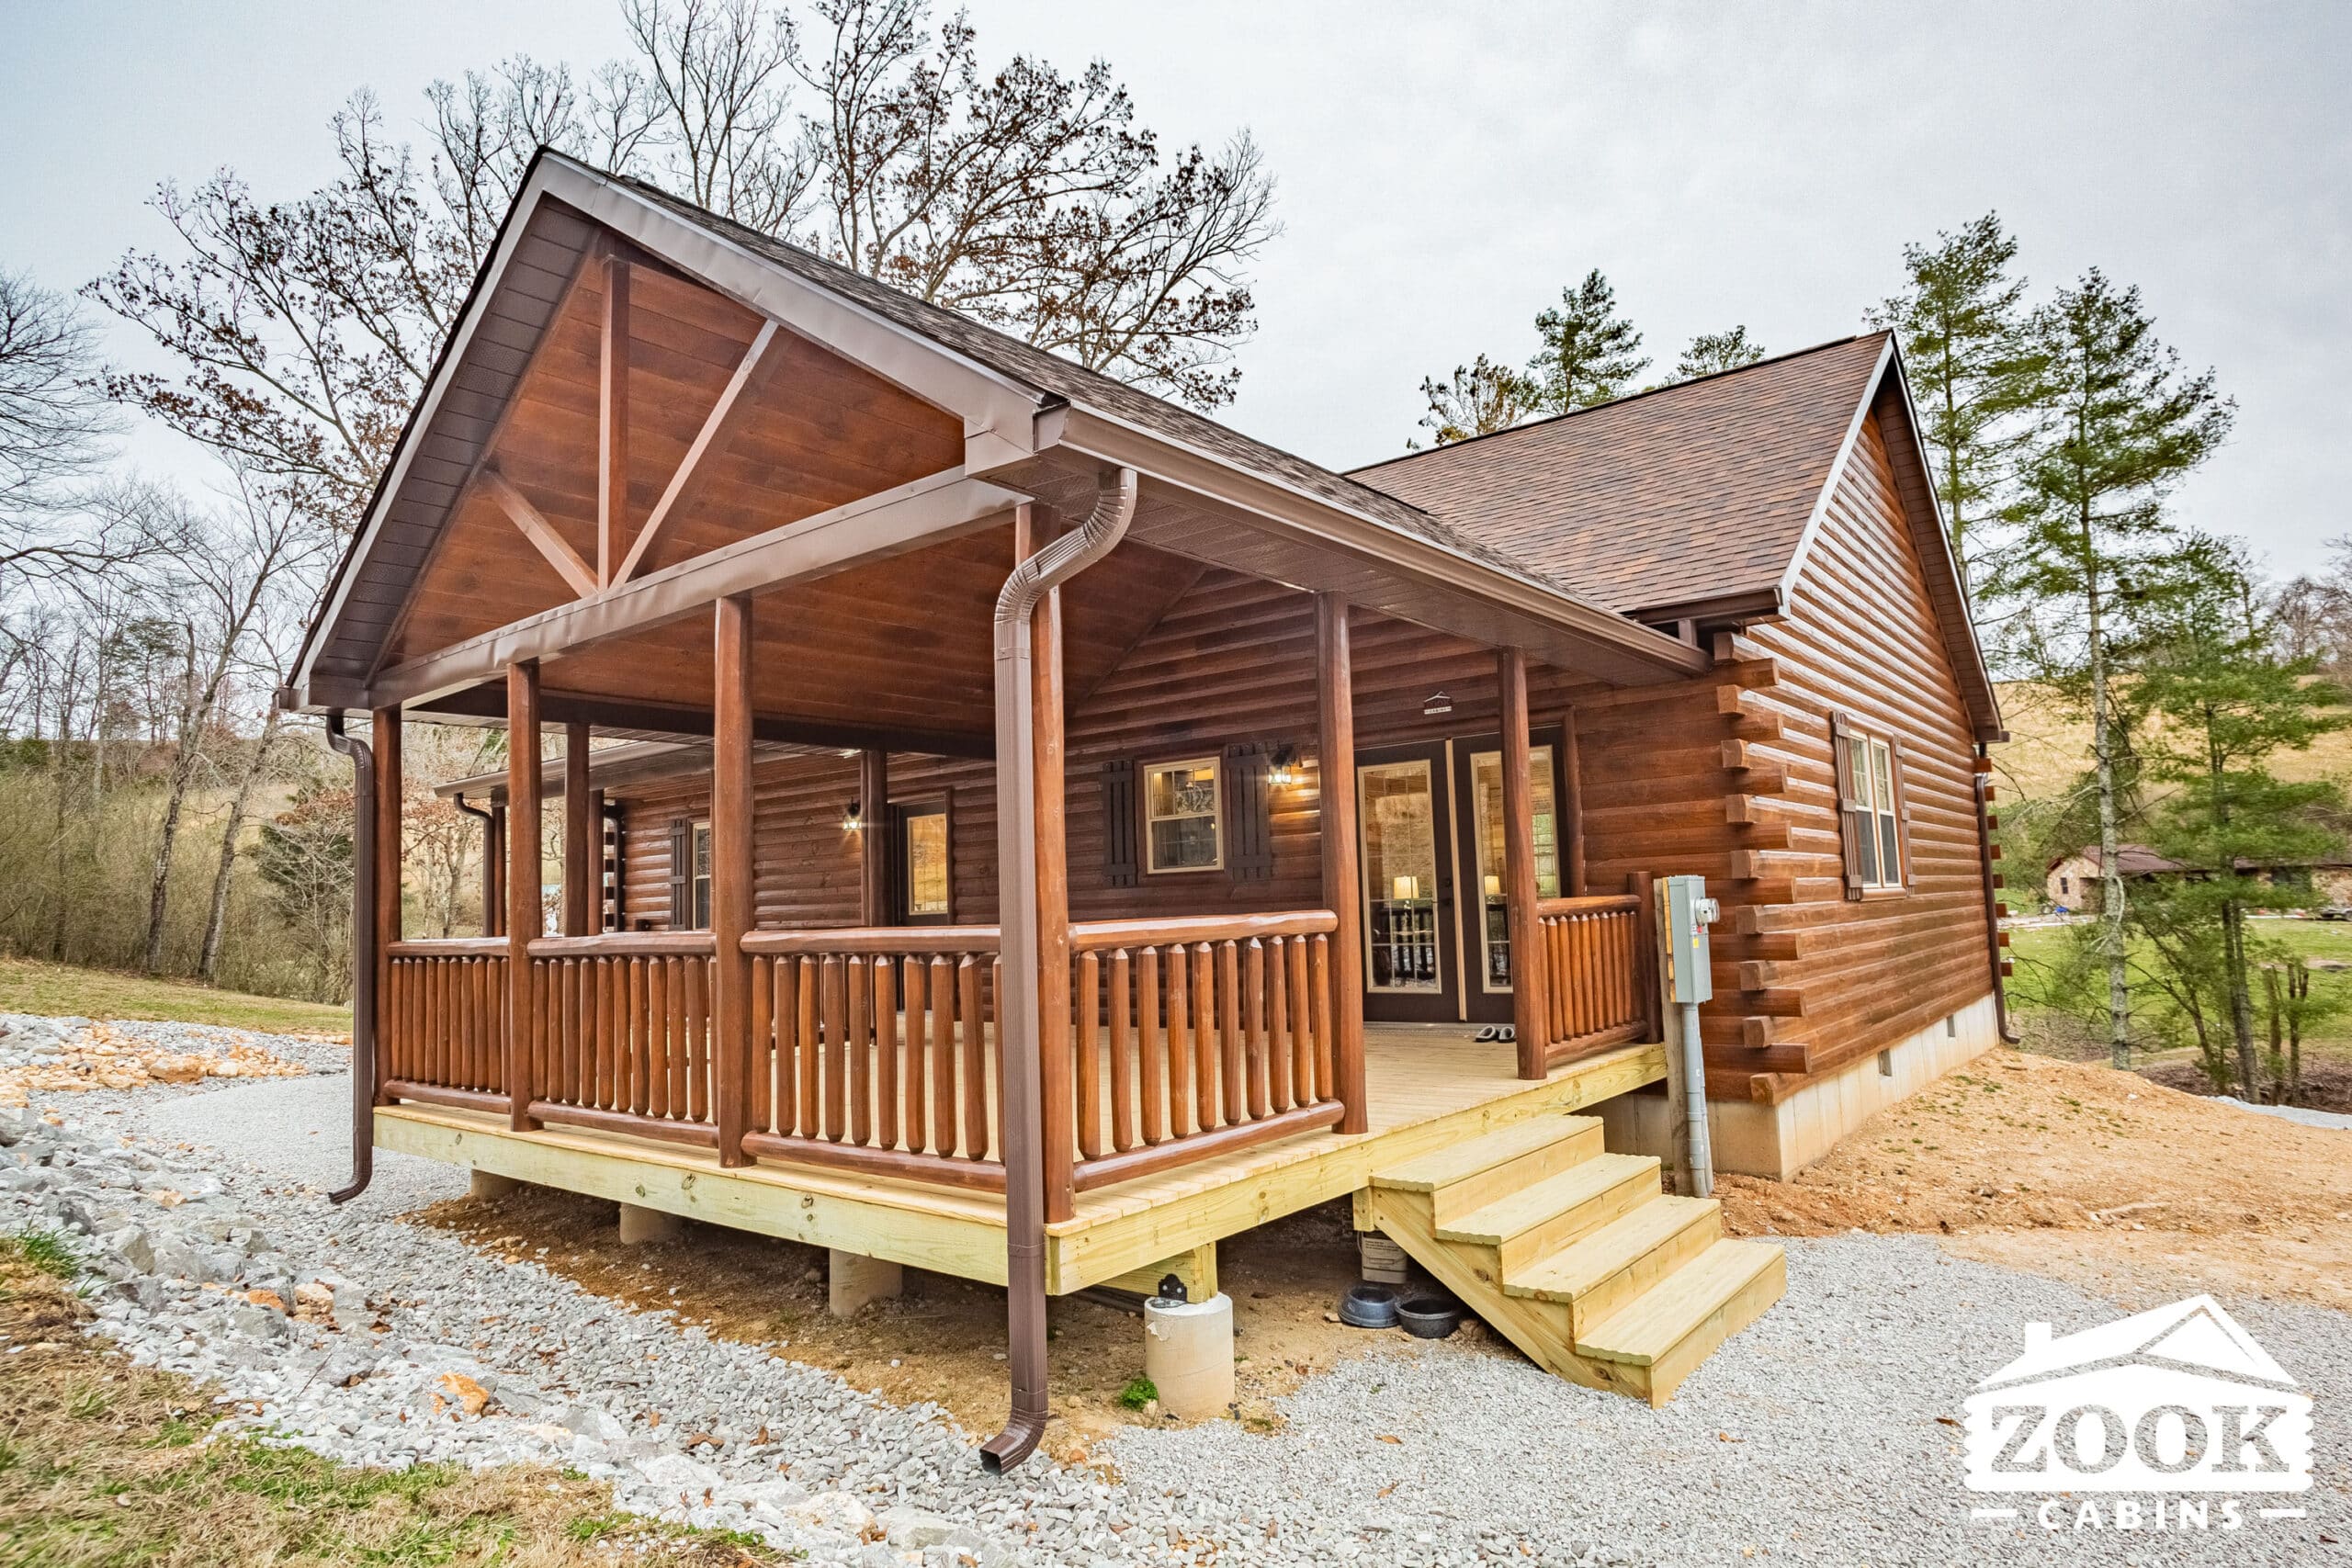 Goldville-exteriror-with-standard-8x16-front-porch